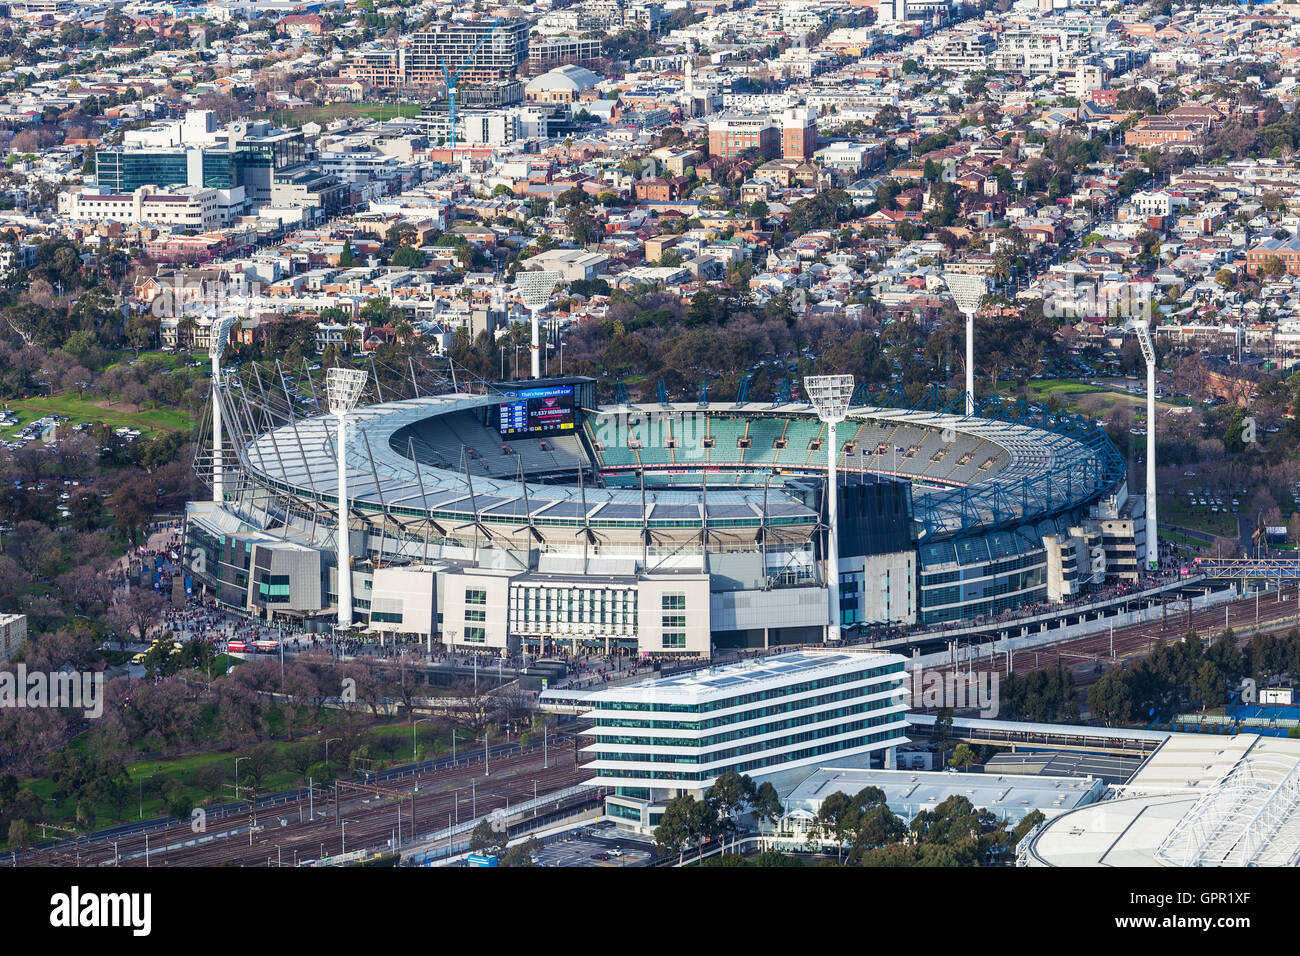 Melbourne, Australia - August 27, 2016: Aerial view of Melbourne Cricket Ground - home of Australian Football and the National S Stock Photo